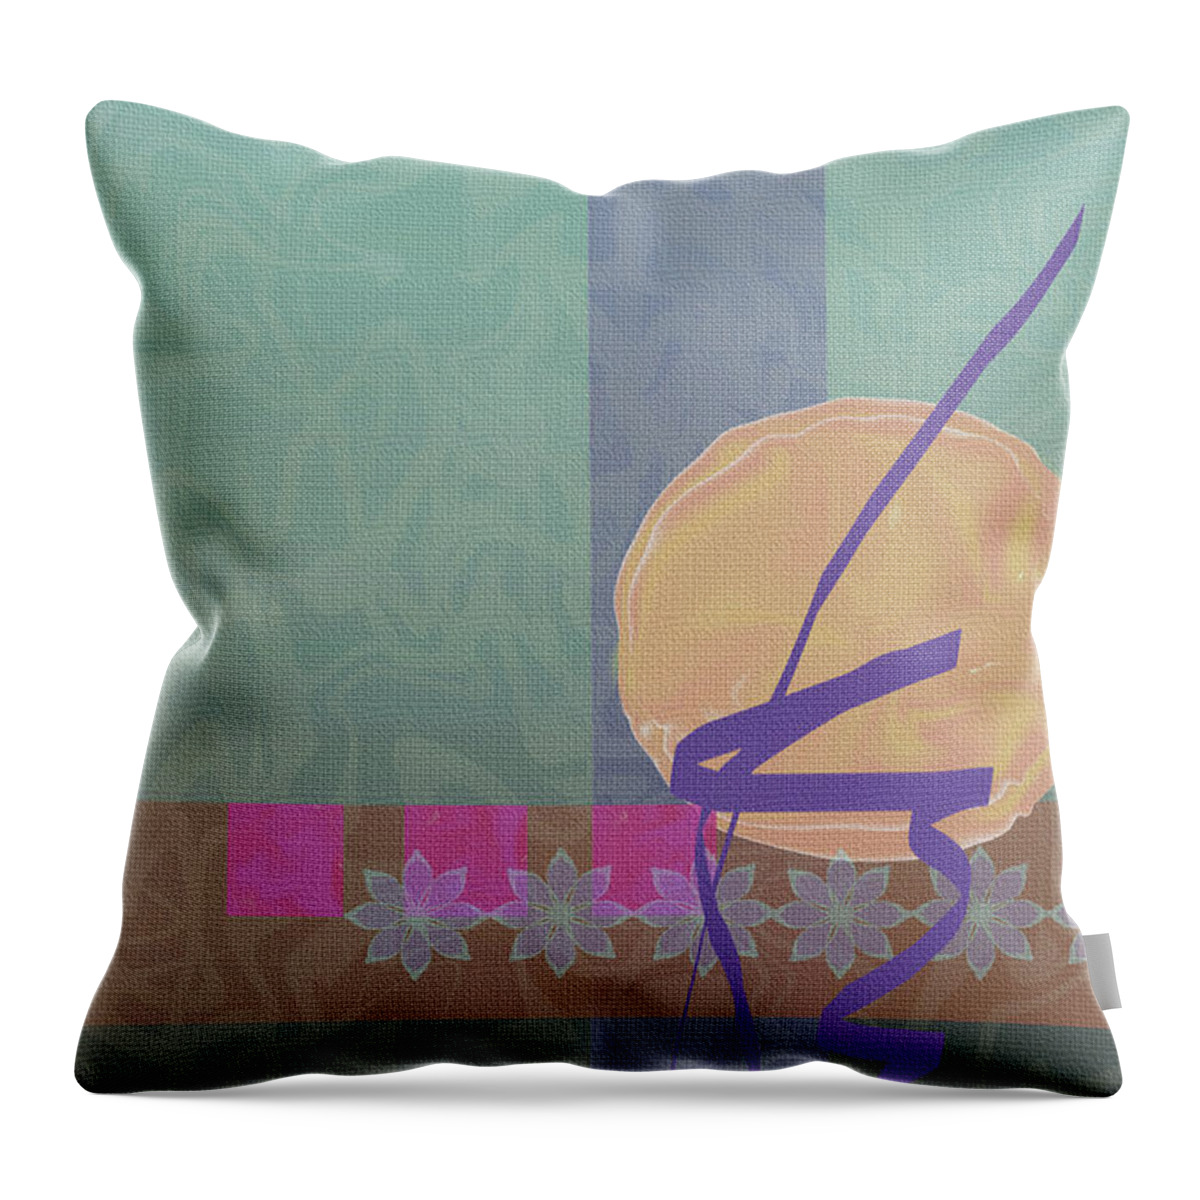 Contemporary Throw Pillow featuring the digital art Good Fortune by Gordon Beck